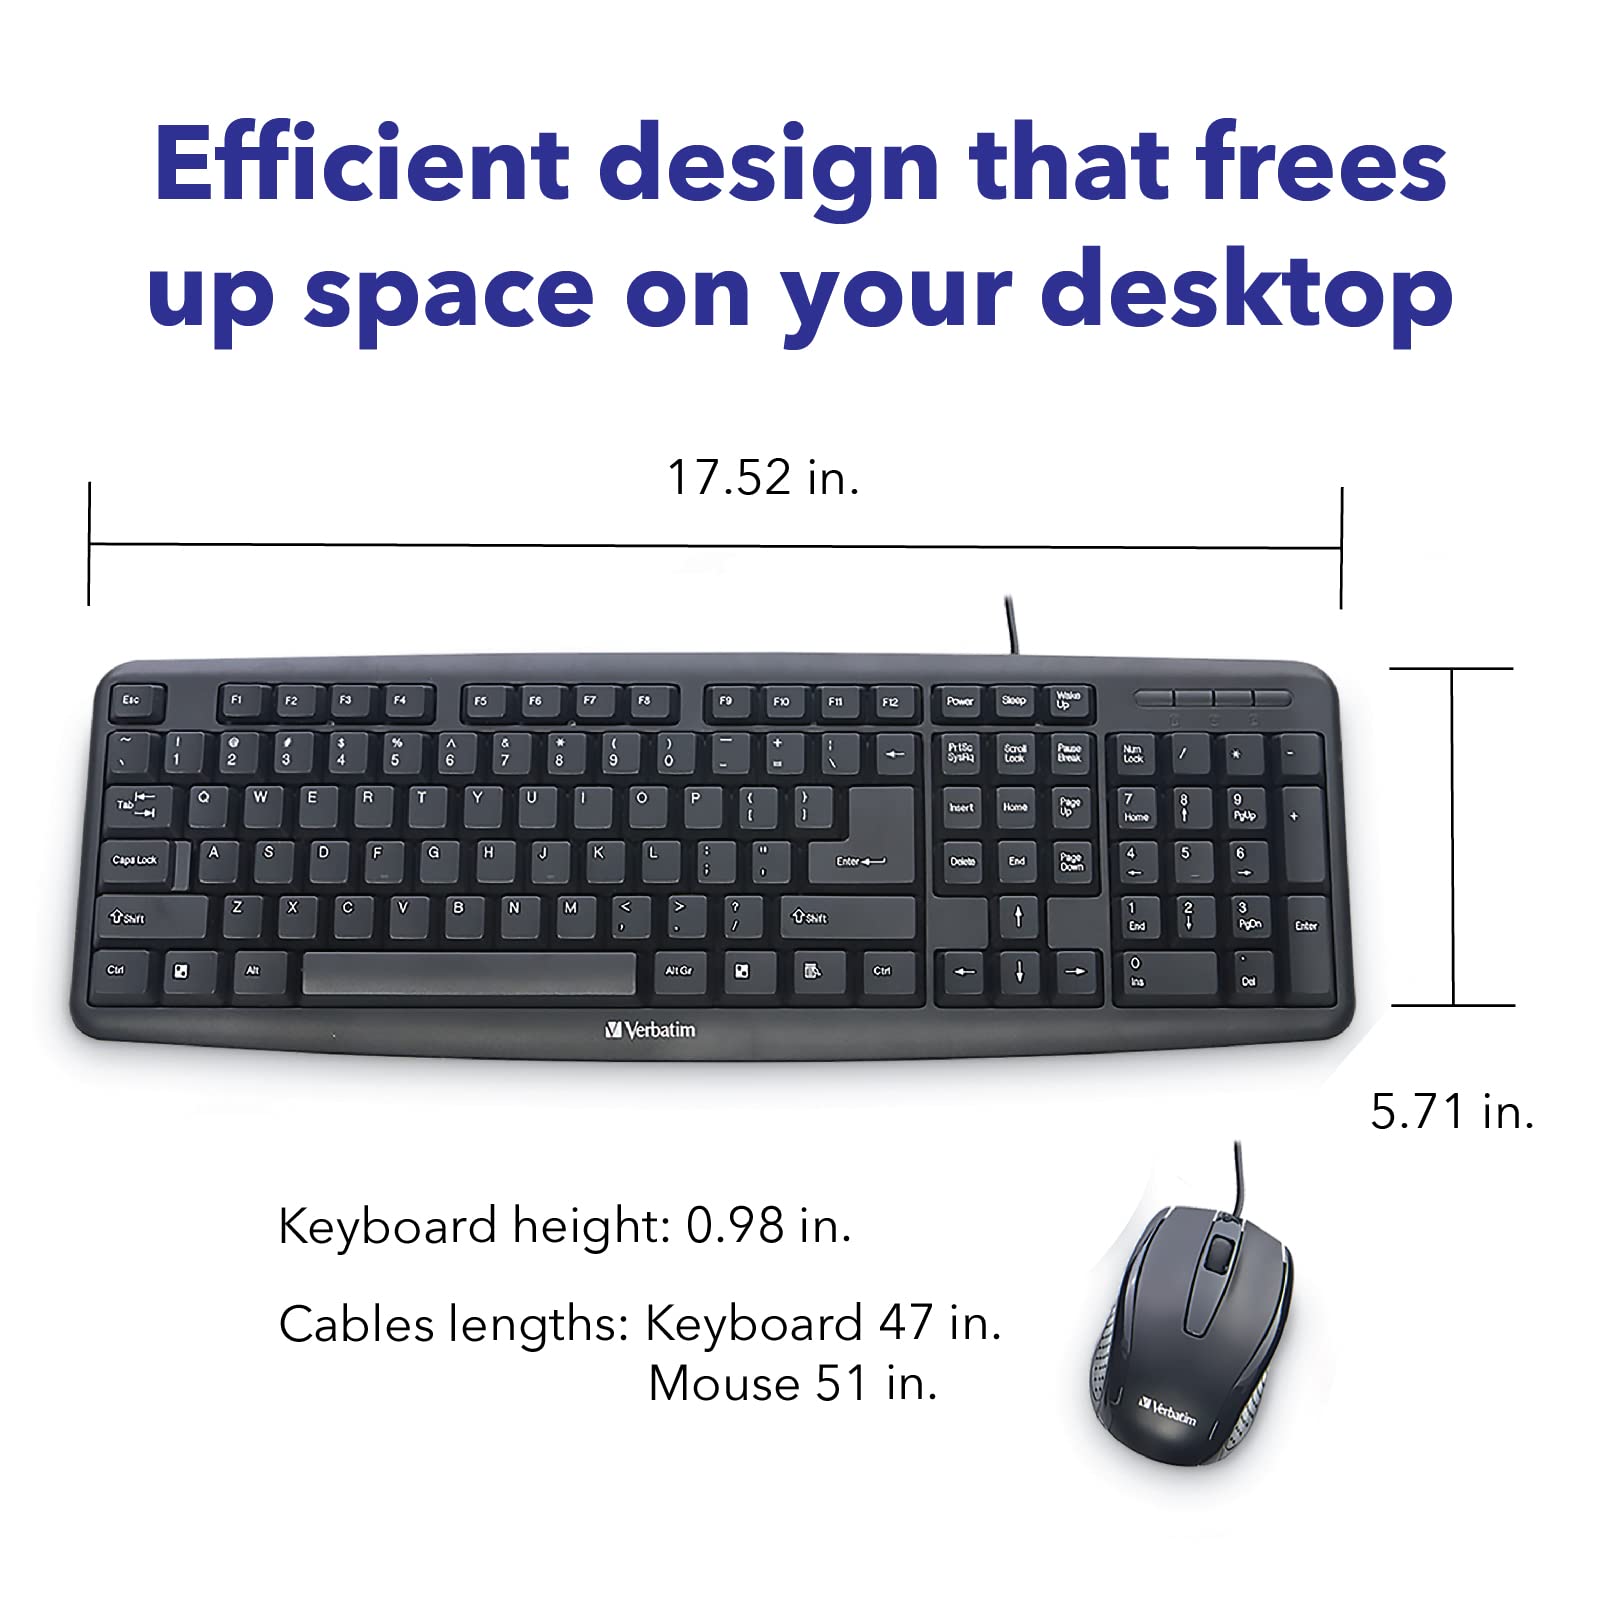 Verbatim Slimline Wired Keyboard and Mouse Combo USB Plug-and-Play Numeric Keypad Adjustable Tilt Legs Optical Corded Mouse Full-Size Computer Keyboard Compatible with PC, Laptop - FFP Packaging Black